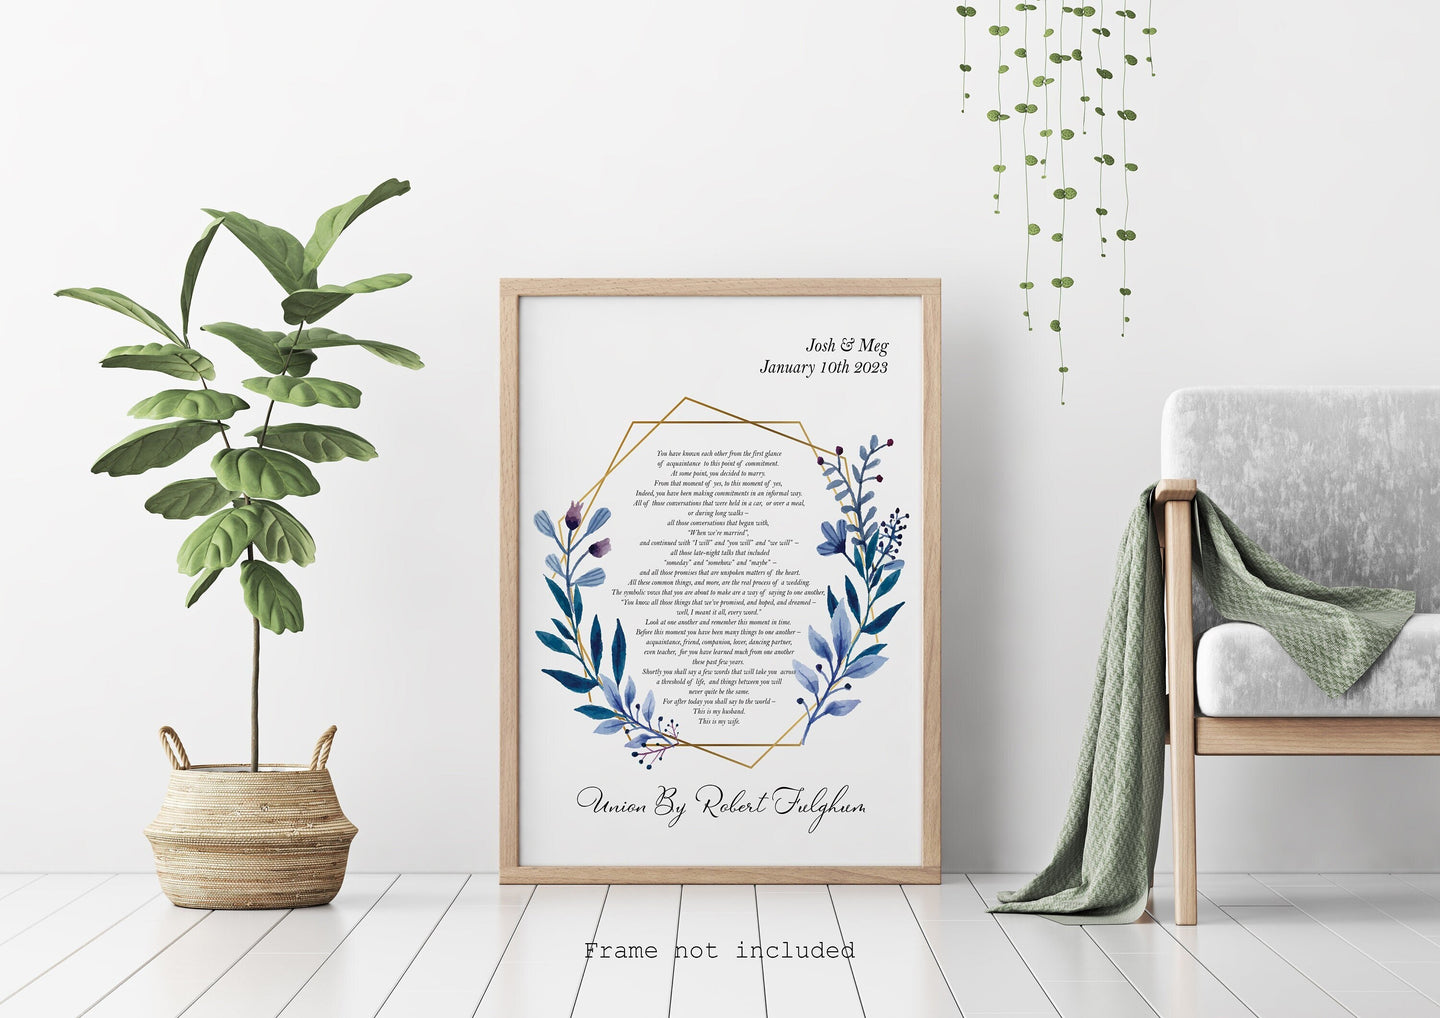 Personalized Wedding Gift Union By Robert Fulghum - Wedding poem wall art - Love Poem - Full Poem - Physical Art Print Without Frame